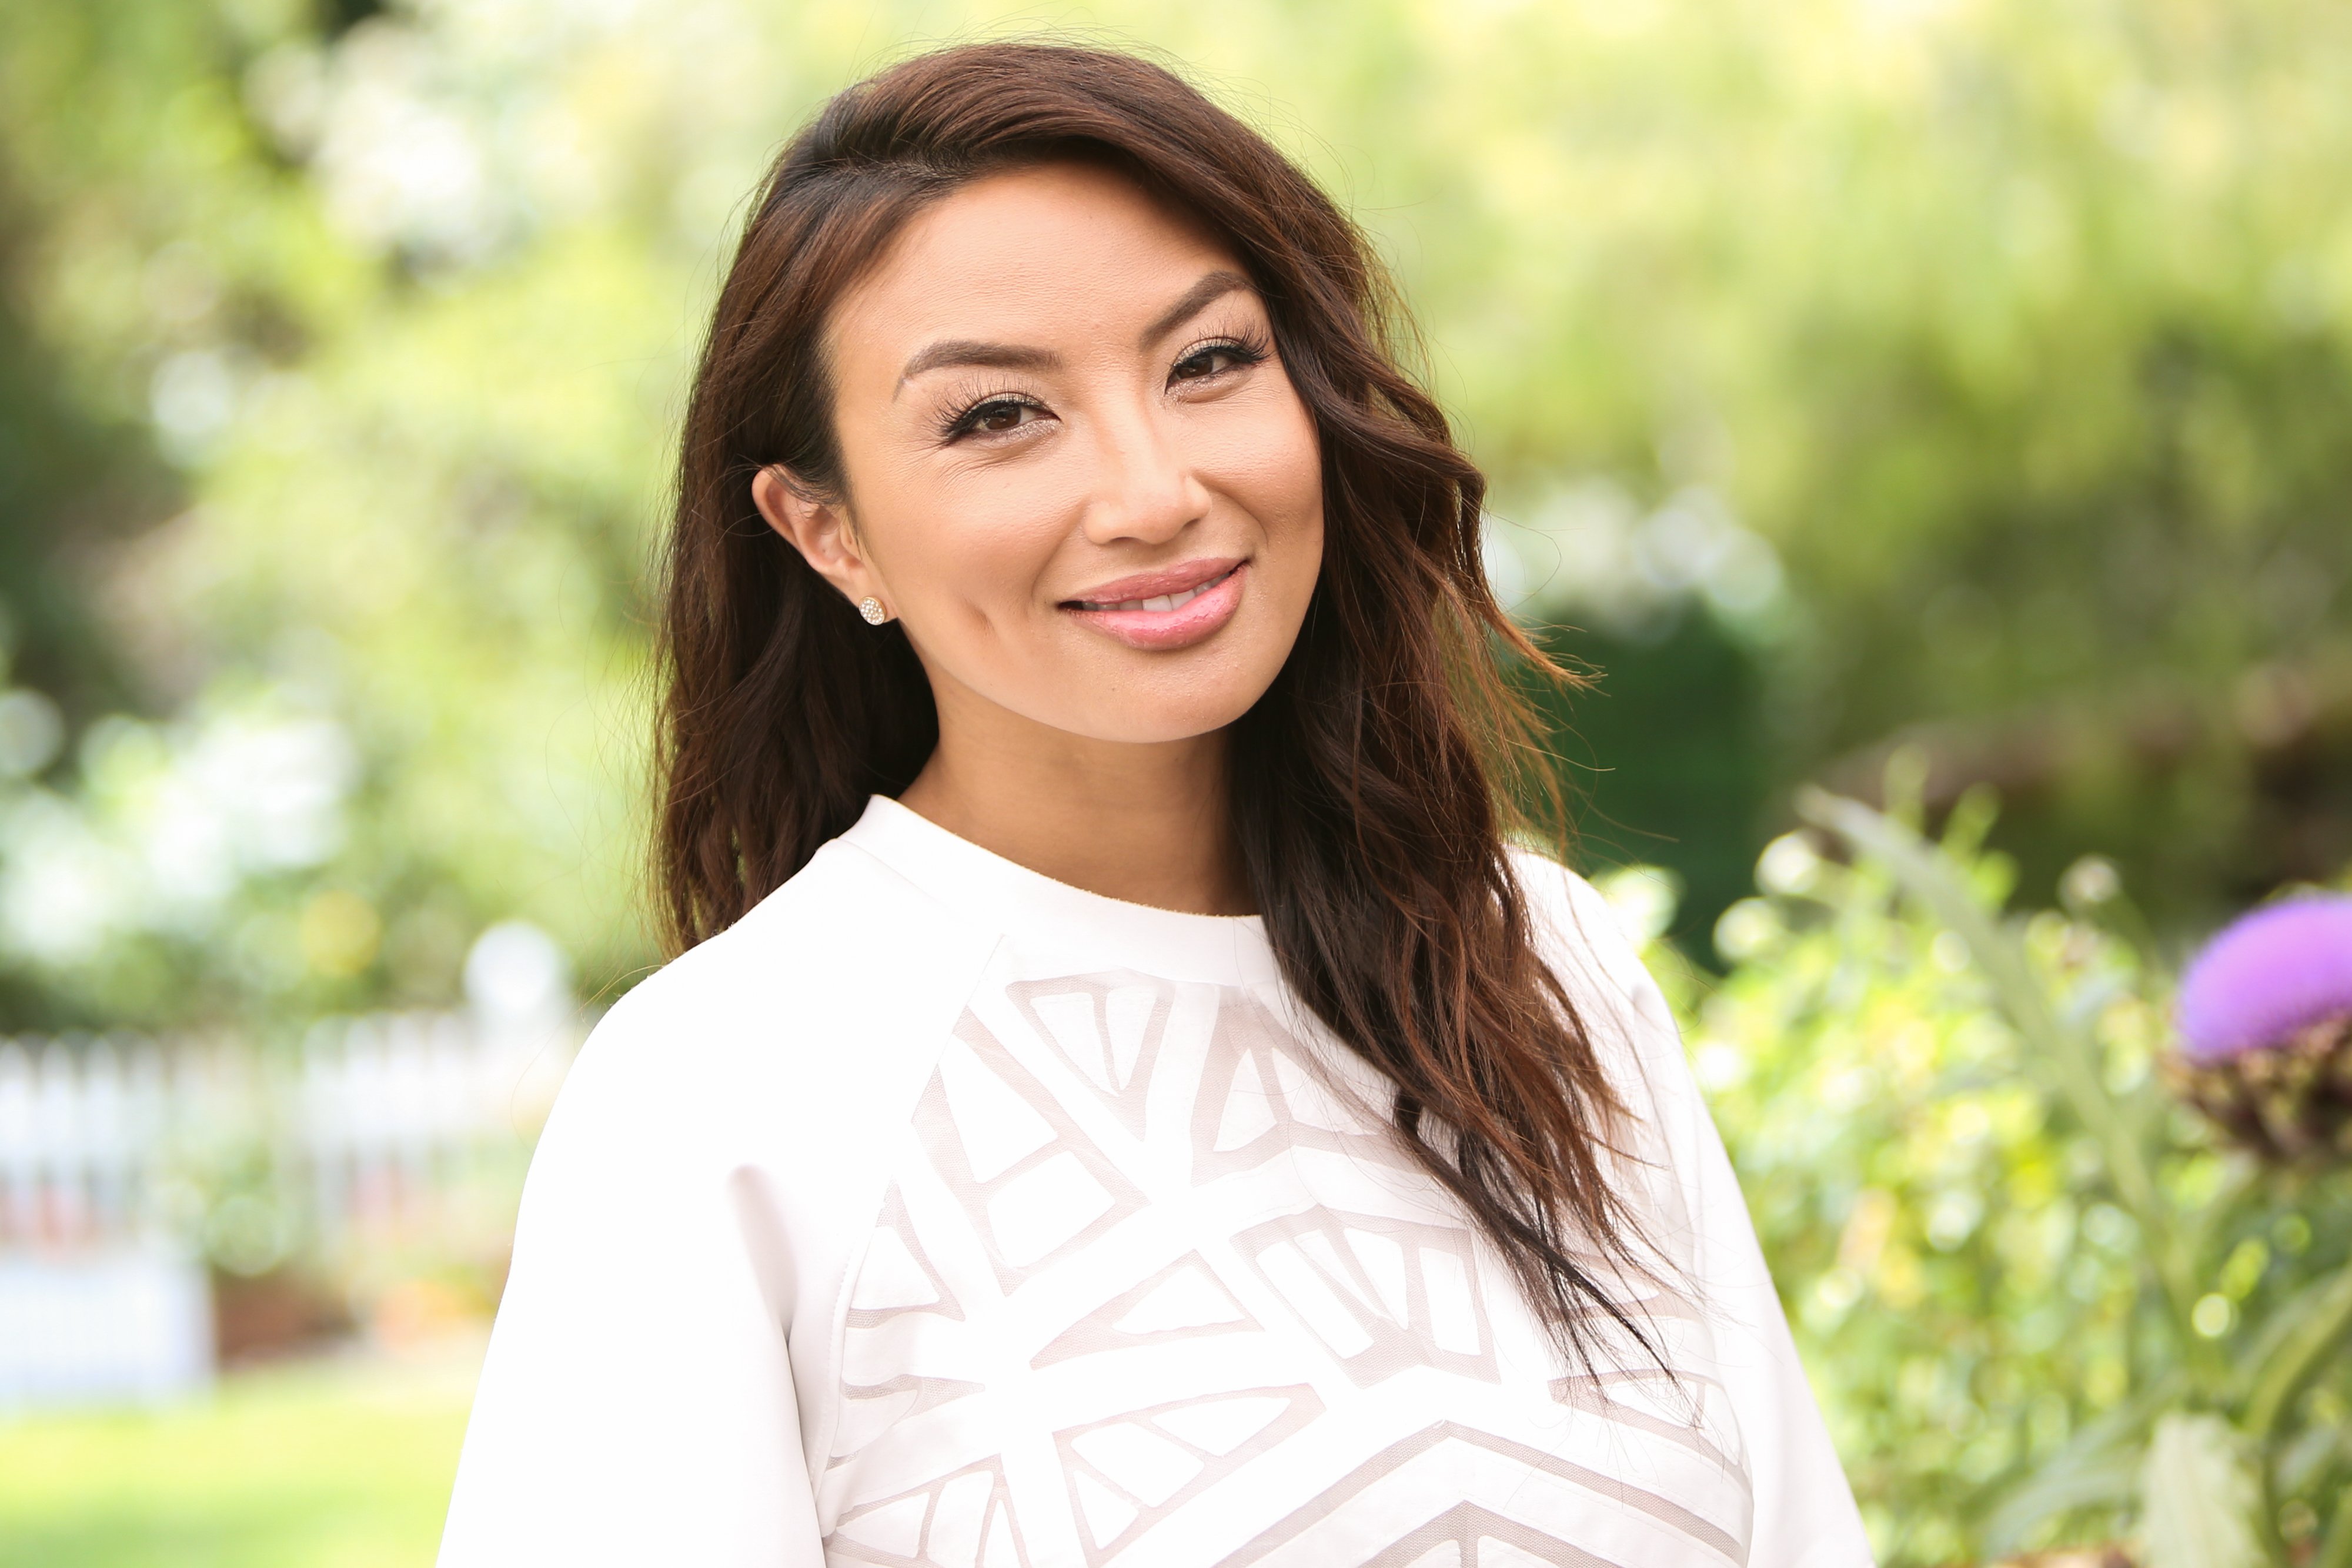 Jeannie Mai visits Hallmark's "Home & Family" at Universal Studios Hollywood on June 11, 2019 | Photo: Getty Images